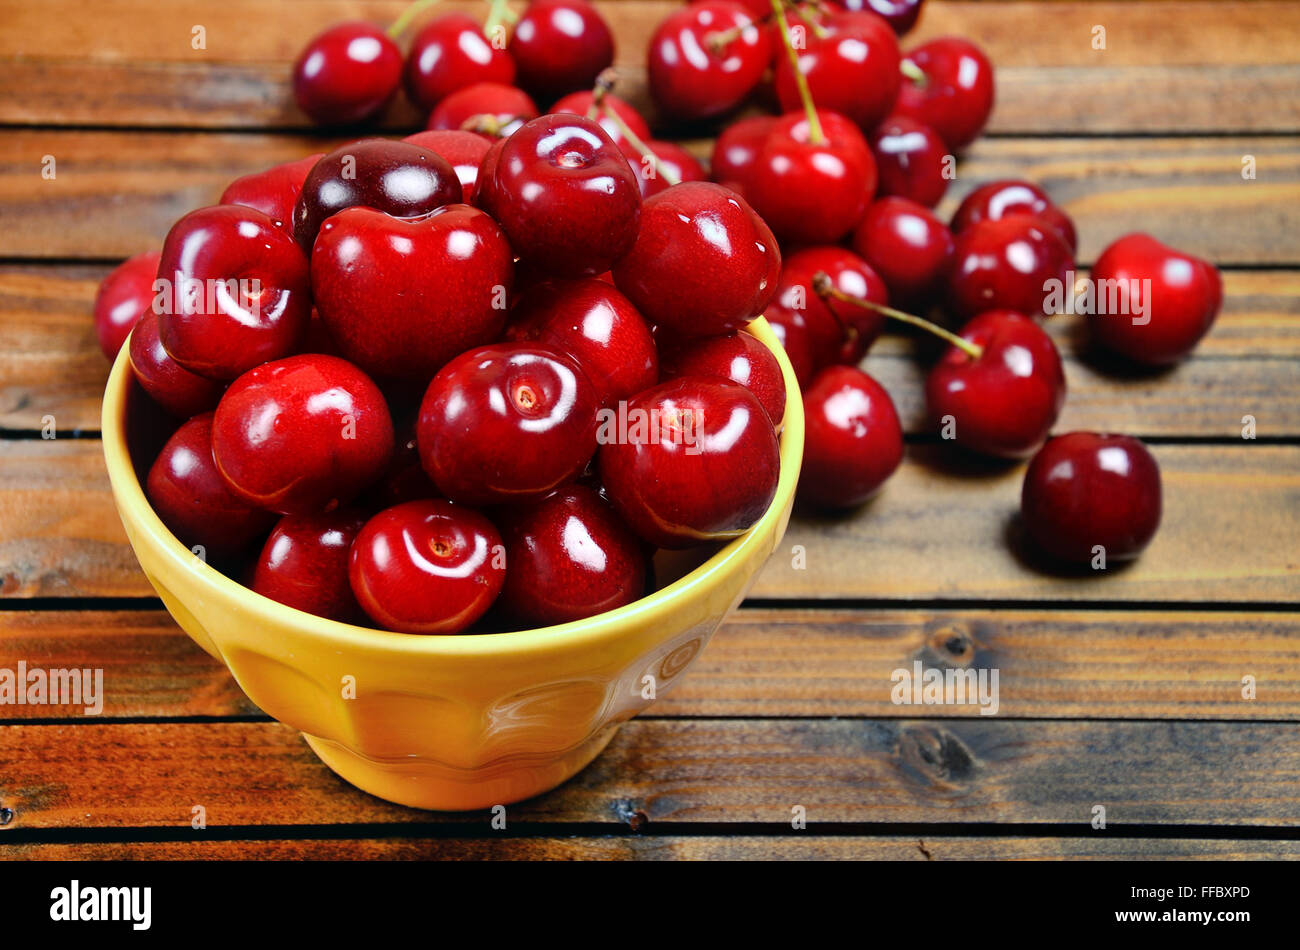 Yellow bowl with cherries on wooden table Stock Photo